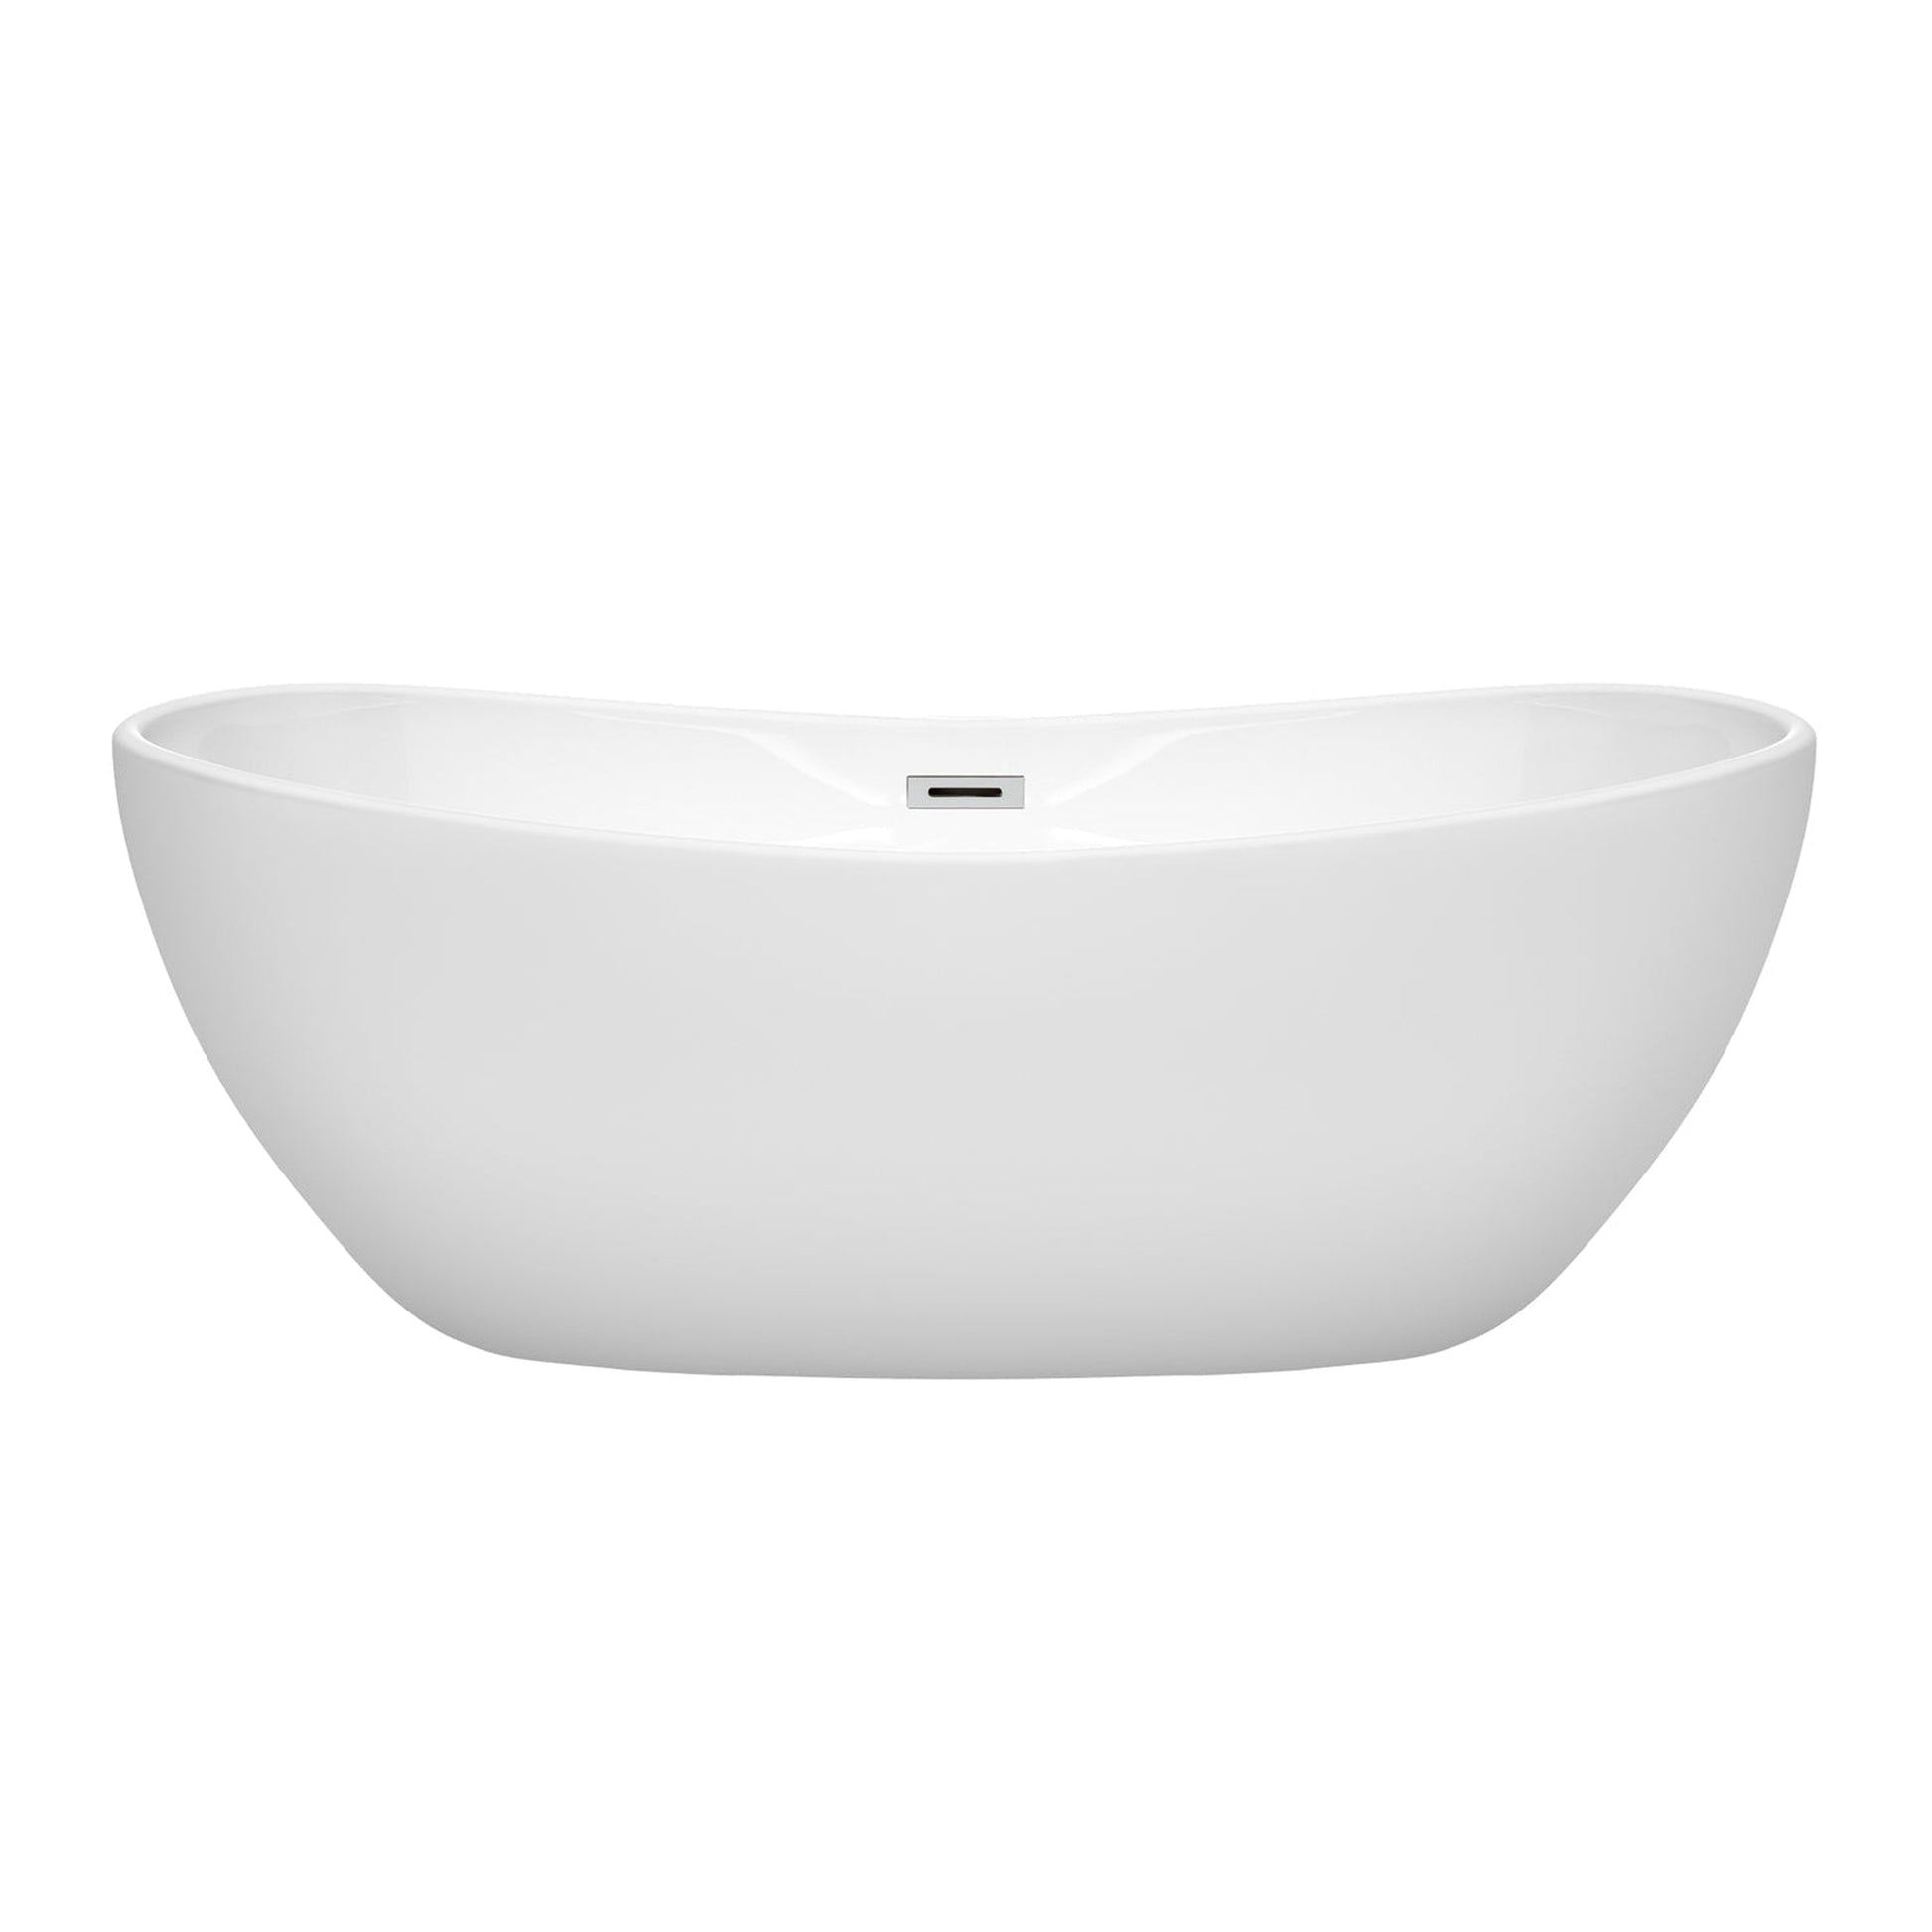 Wyndham Collection Rebecca 65" Freestanding Bathtub in White With Polished Chrome Drain and Overflow Trim